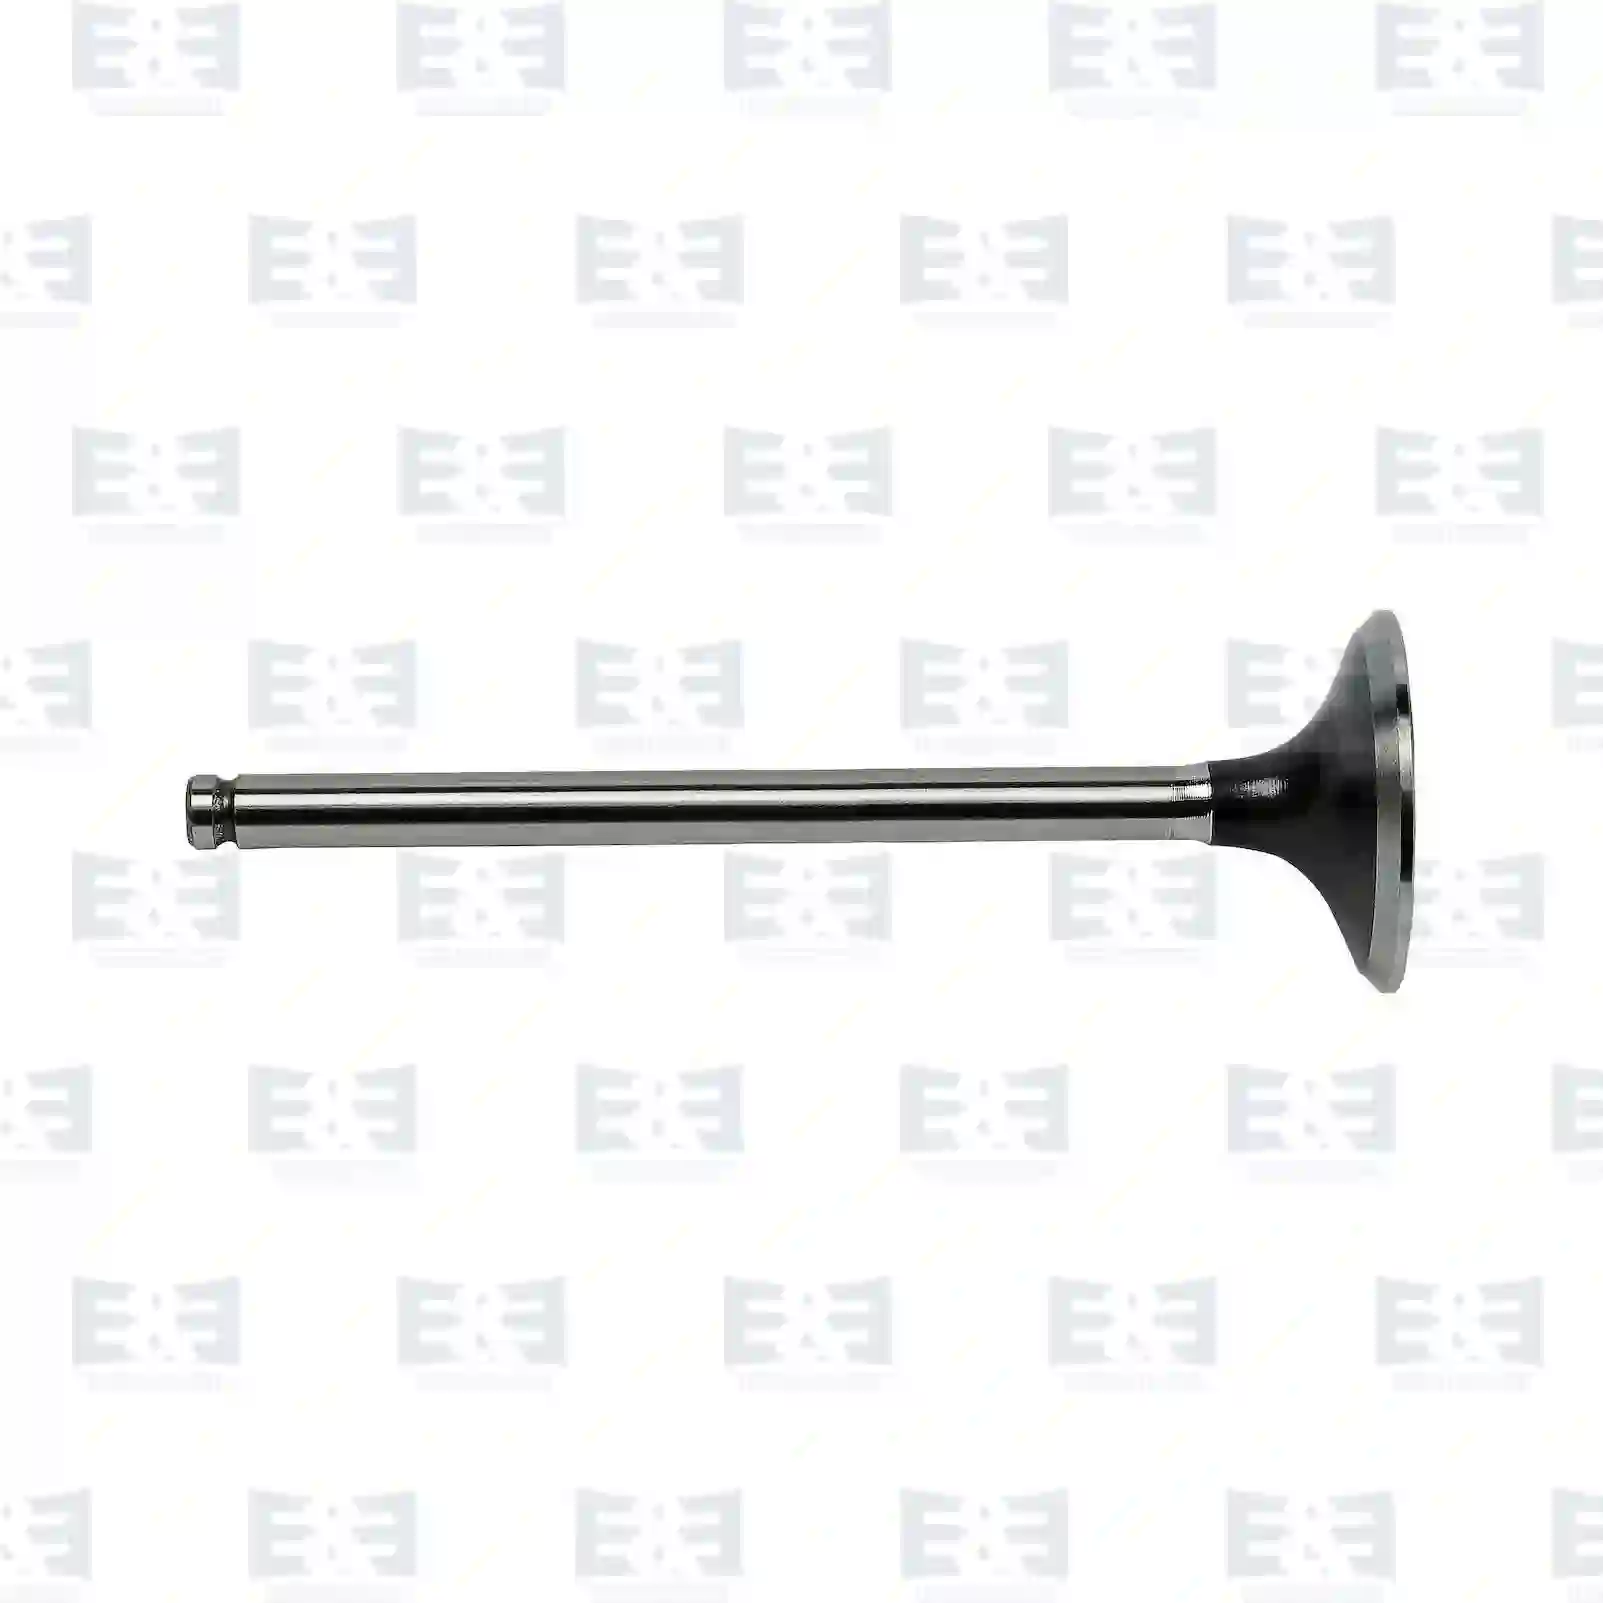  Cylinder Head Intake valve, EE No 2E2207078 ,  oem no:9110633, 93183907, MW30620685, 13201-00QAC, 13201-00QAM, 13201-AW300, 4402633, 4415921, 7700110386, 7700110387, 7701471702, 7701476024 E&E Truck Spare Parts | Truck Spare Parts, Auotomotive Spare Parts